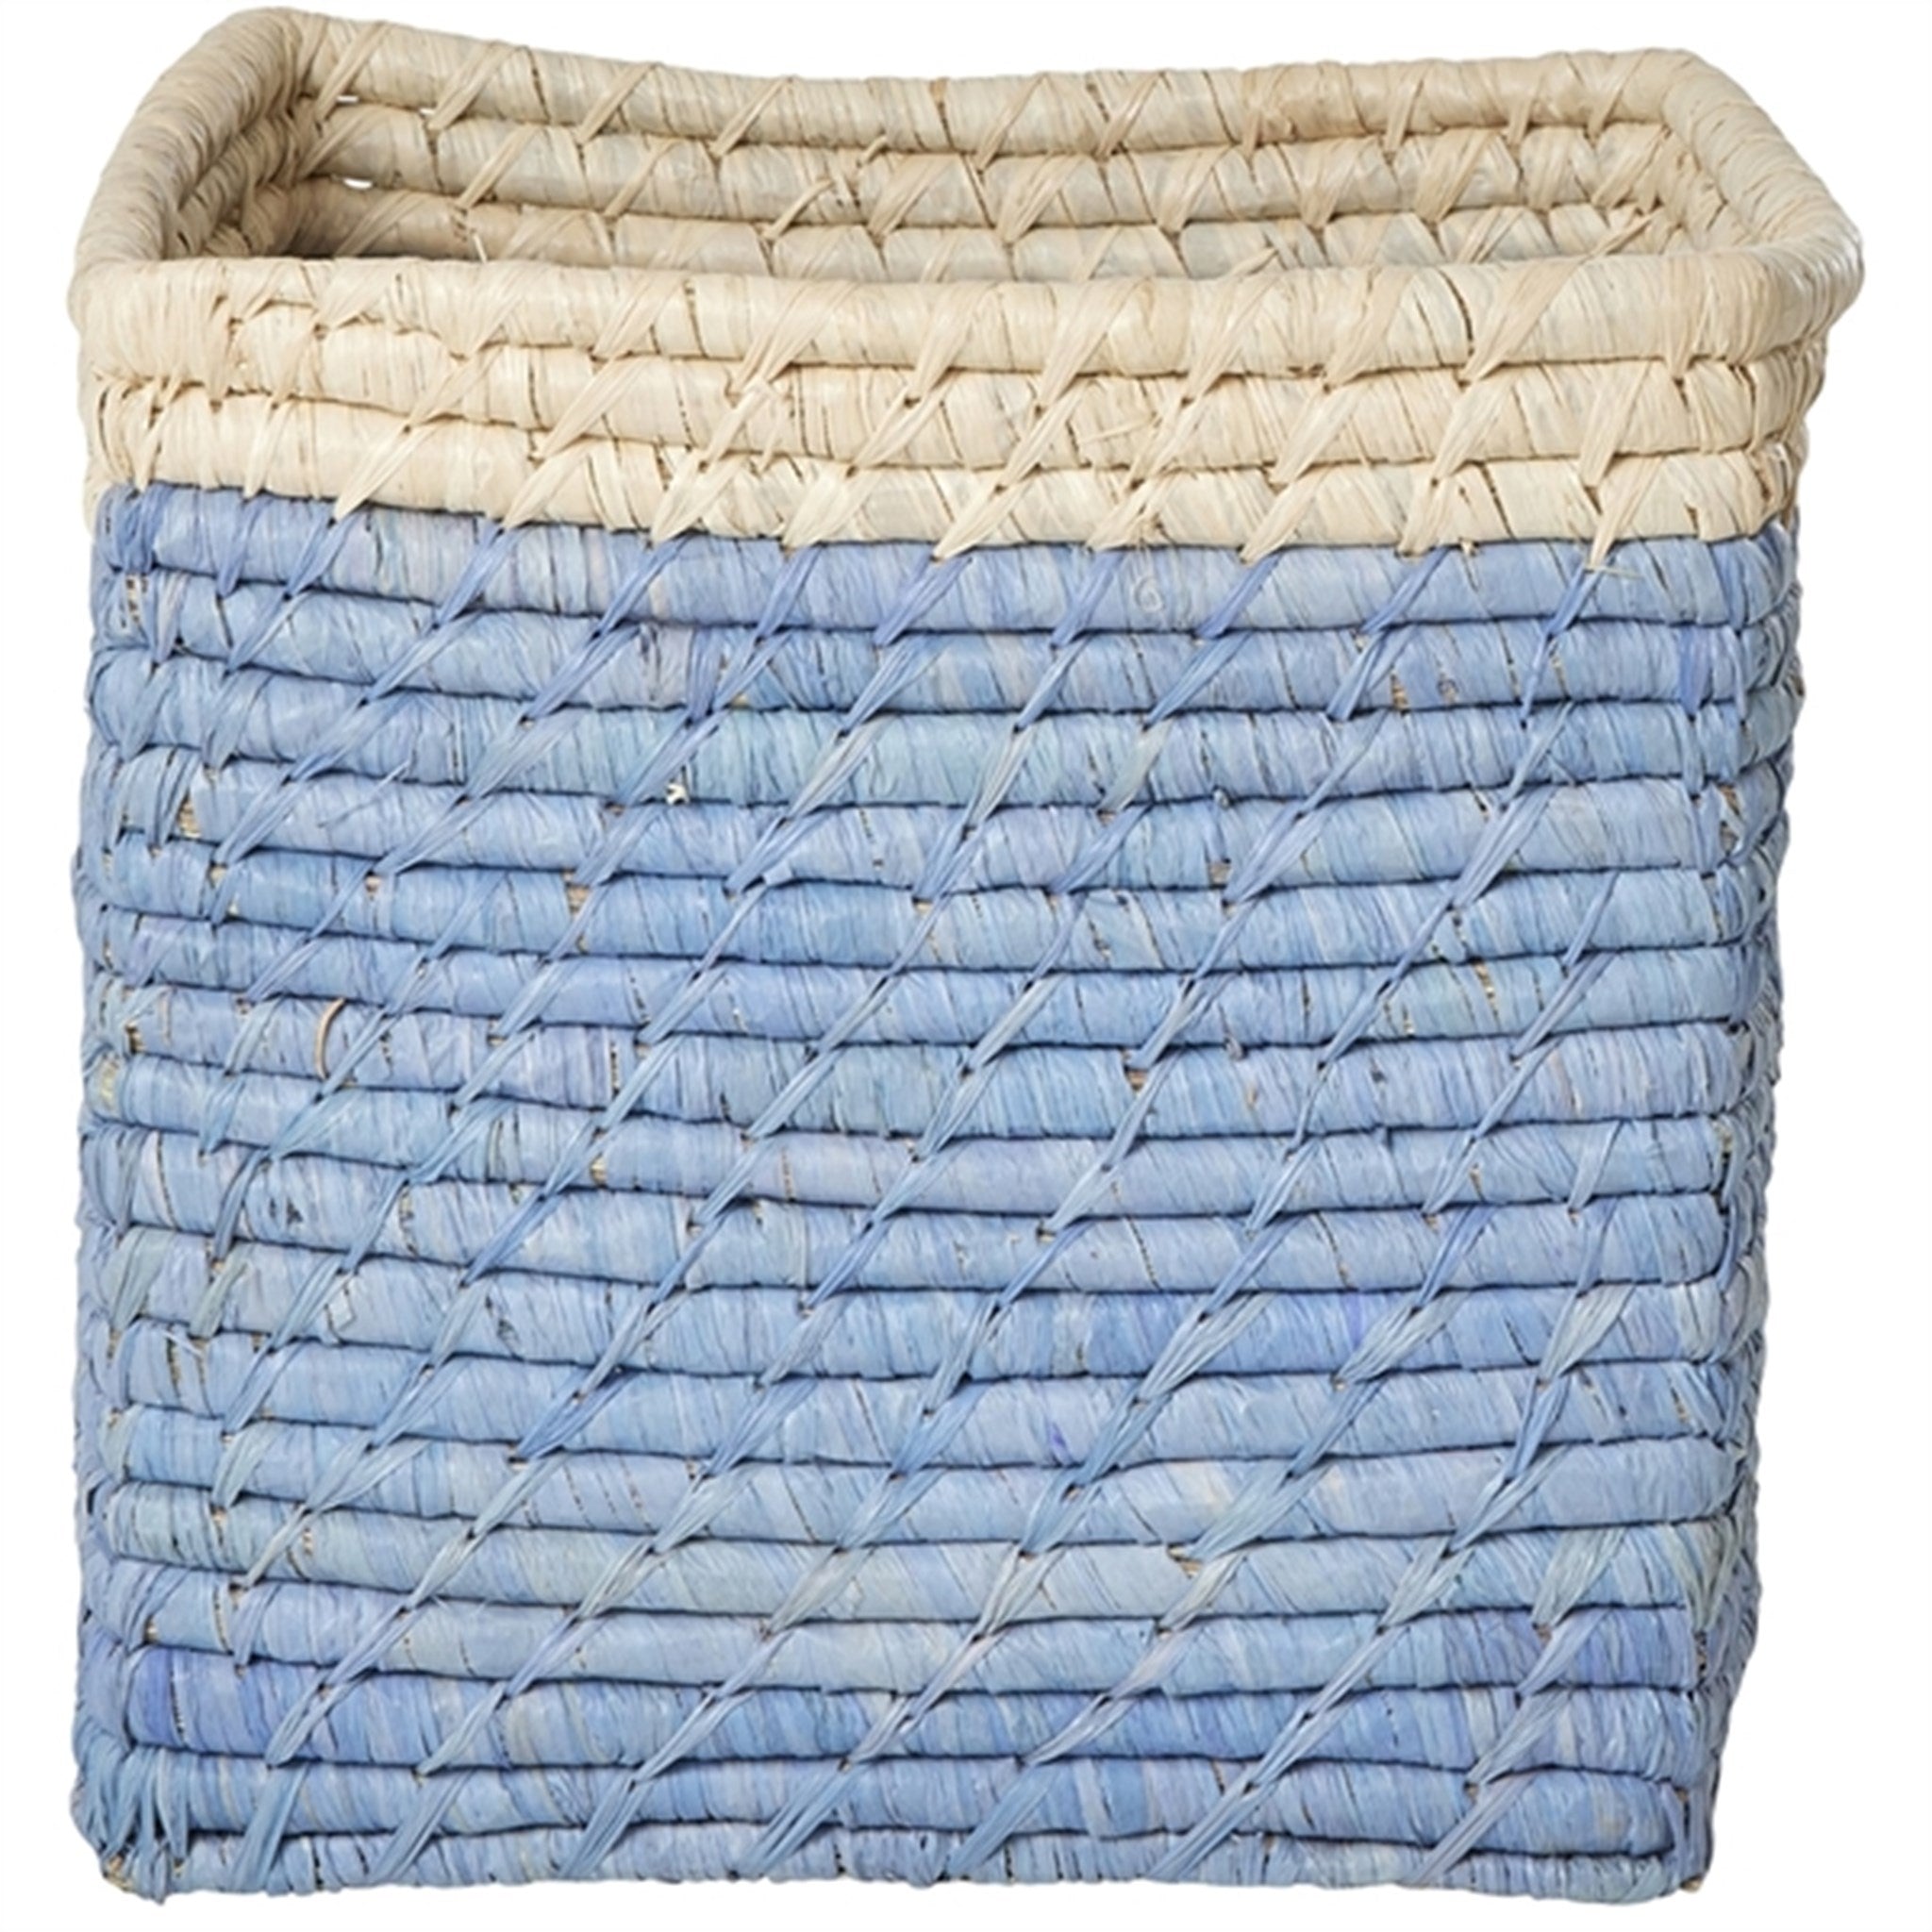 RICE Blue/Nature Basket for Storage Small